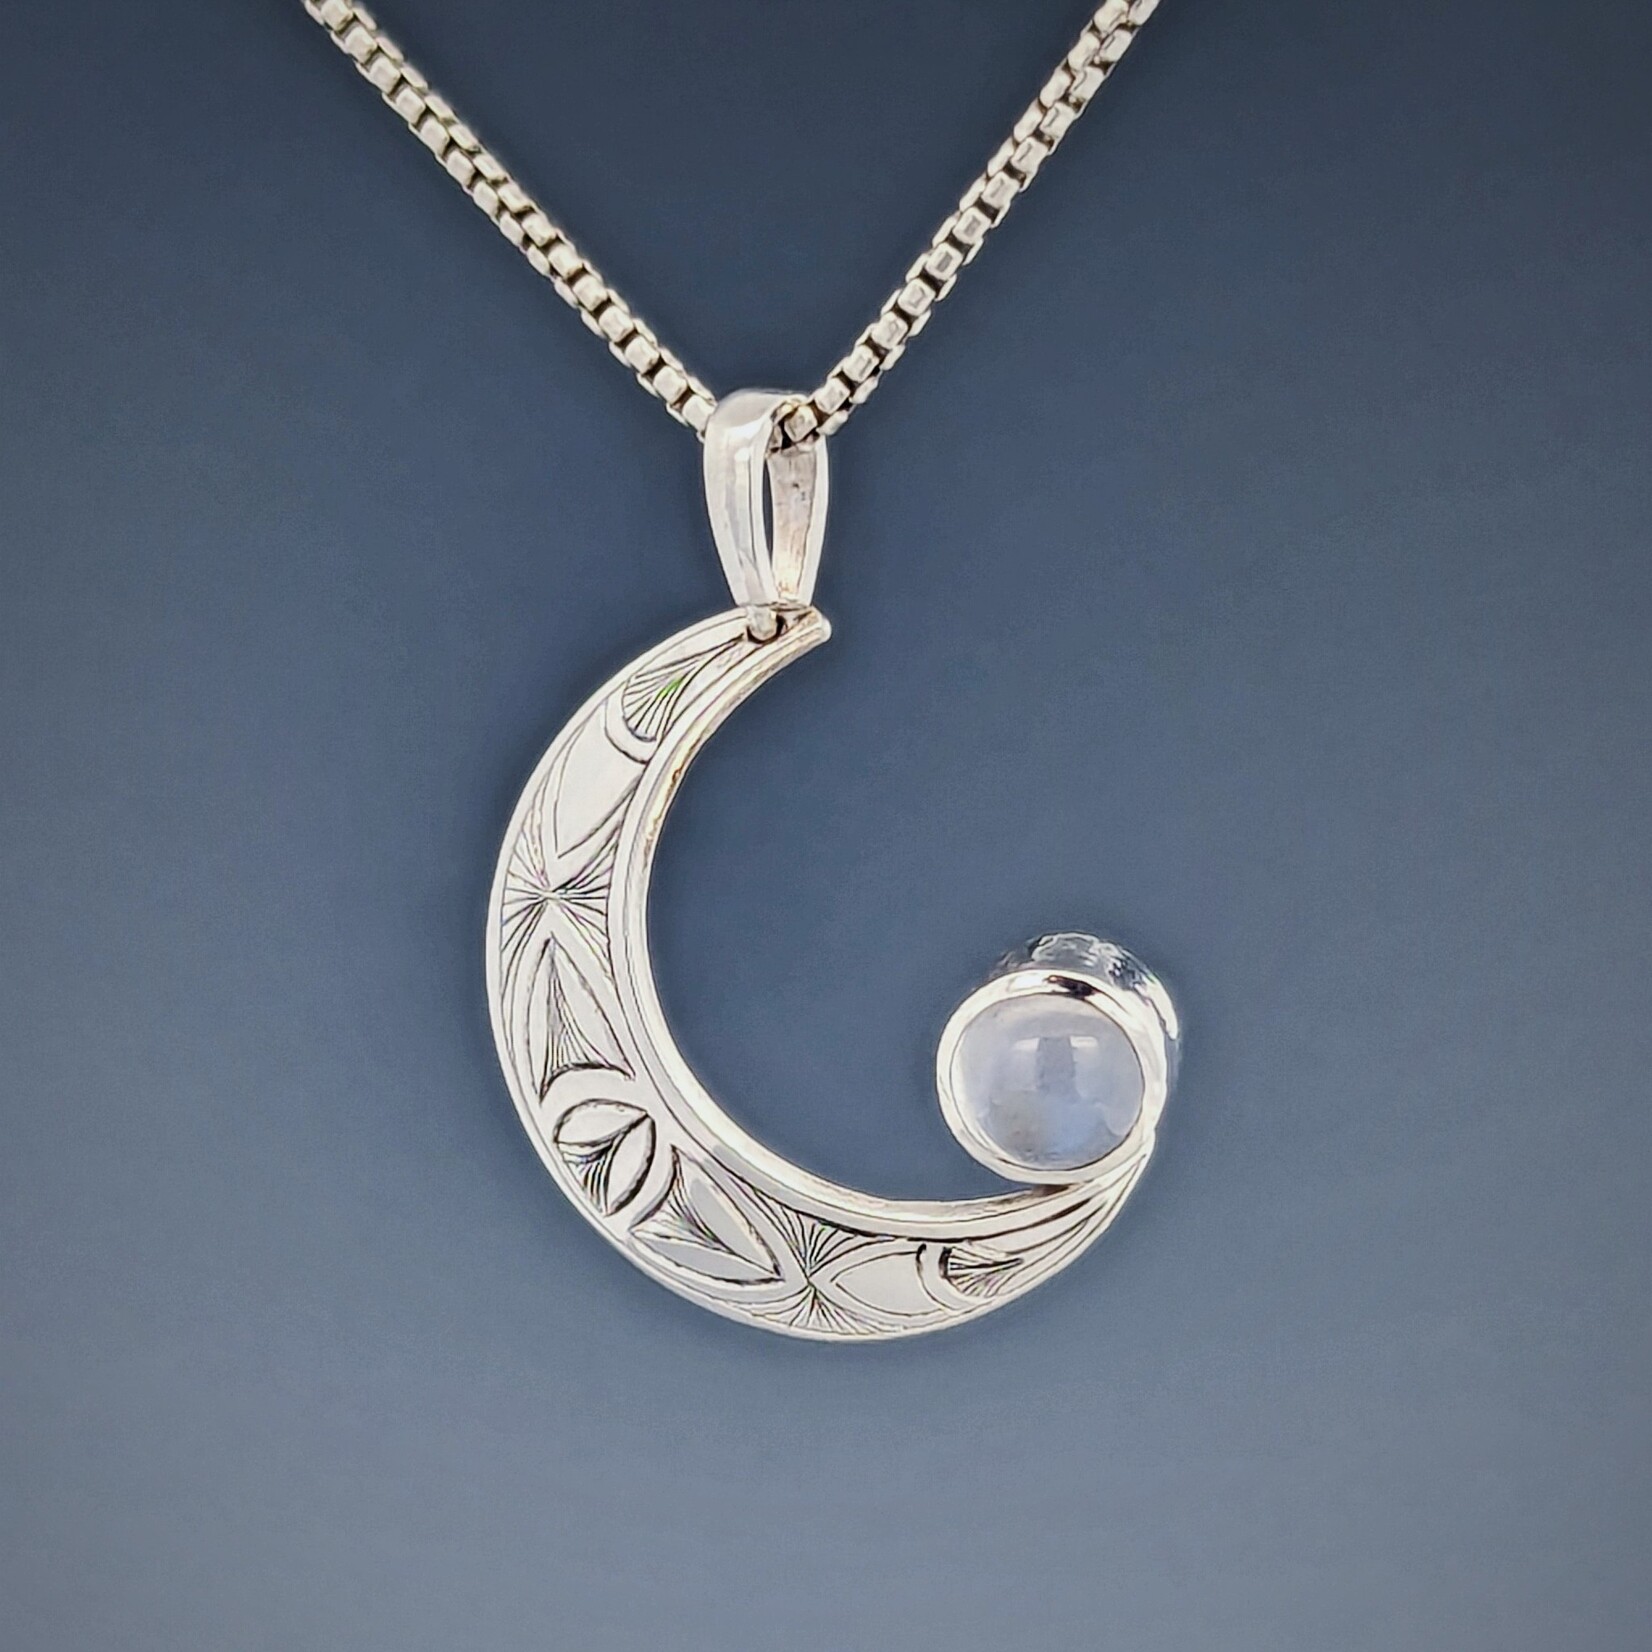 Modern Heirloom® Engraved 22mm Crescent Moon w/ 6mm Moonstone Necklace